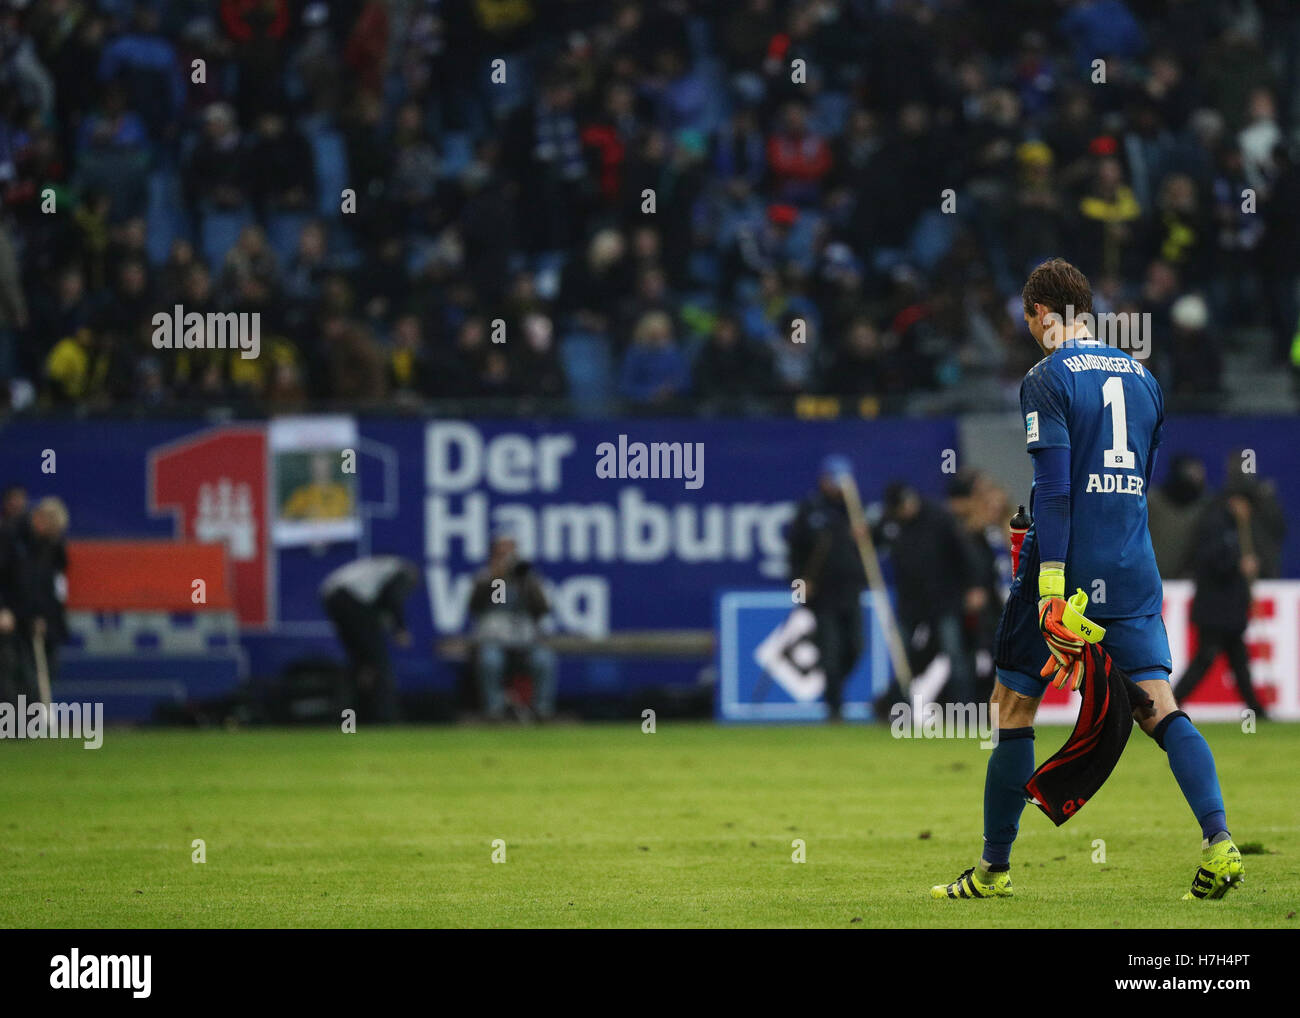 Hamburg, Germany. 5th Nov, 2016. Hamburg's goalkeeper Réne Adler walks across the pitch during the half-time break of the match between Hamburger SV and Borussia Dortmund on the tenth match day of the Bundesliga at Volksparkstadion in Hamburg, Germany, 5 November 2016. PHOTO: CHRISTIAN CHARISIUS/dpa (ATTENTION: Due to the accreditation guidelines, the DFL only permits the publication and utilisation of up to 15 pictures per match on the internet and in online media during the match.) Credit:  dpa/Alamy Live News Stock Photo